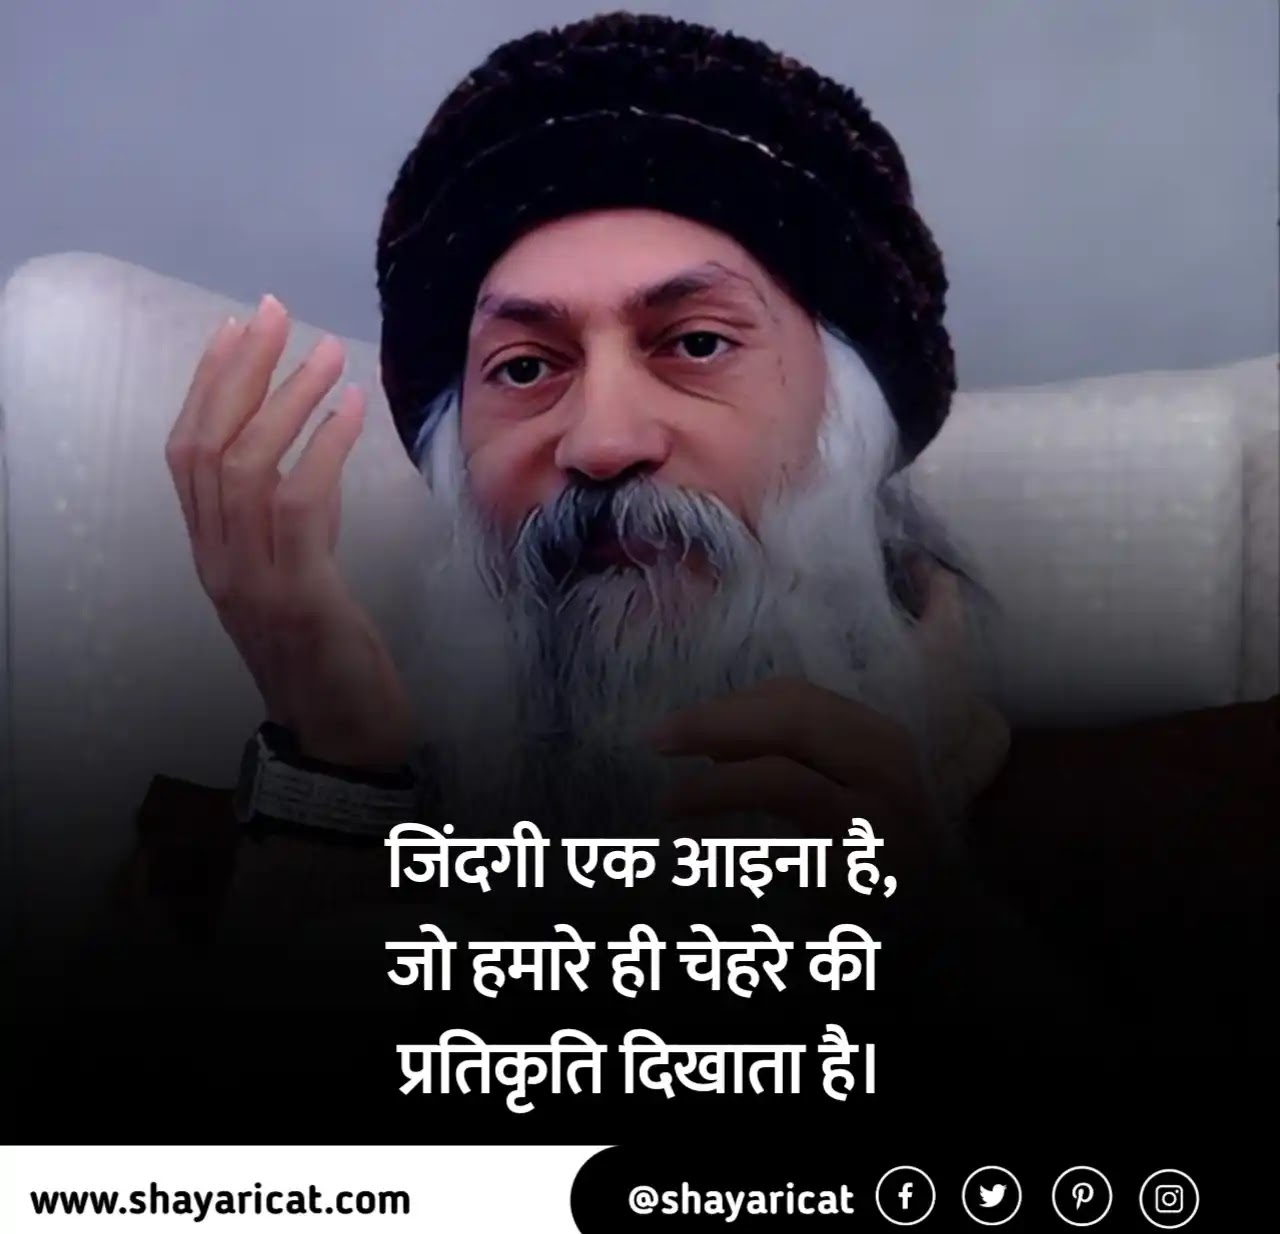 60+] Osho Quotes in Hindi | ओशो के अनमोल विचार